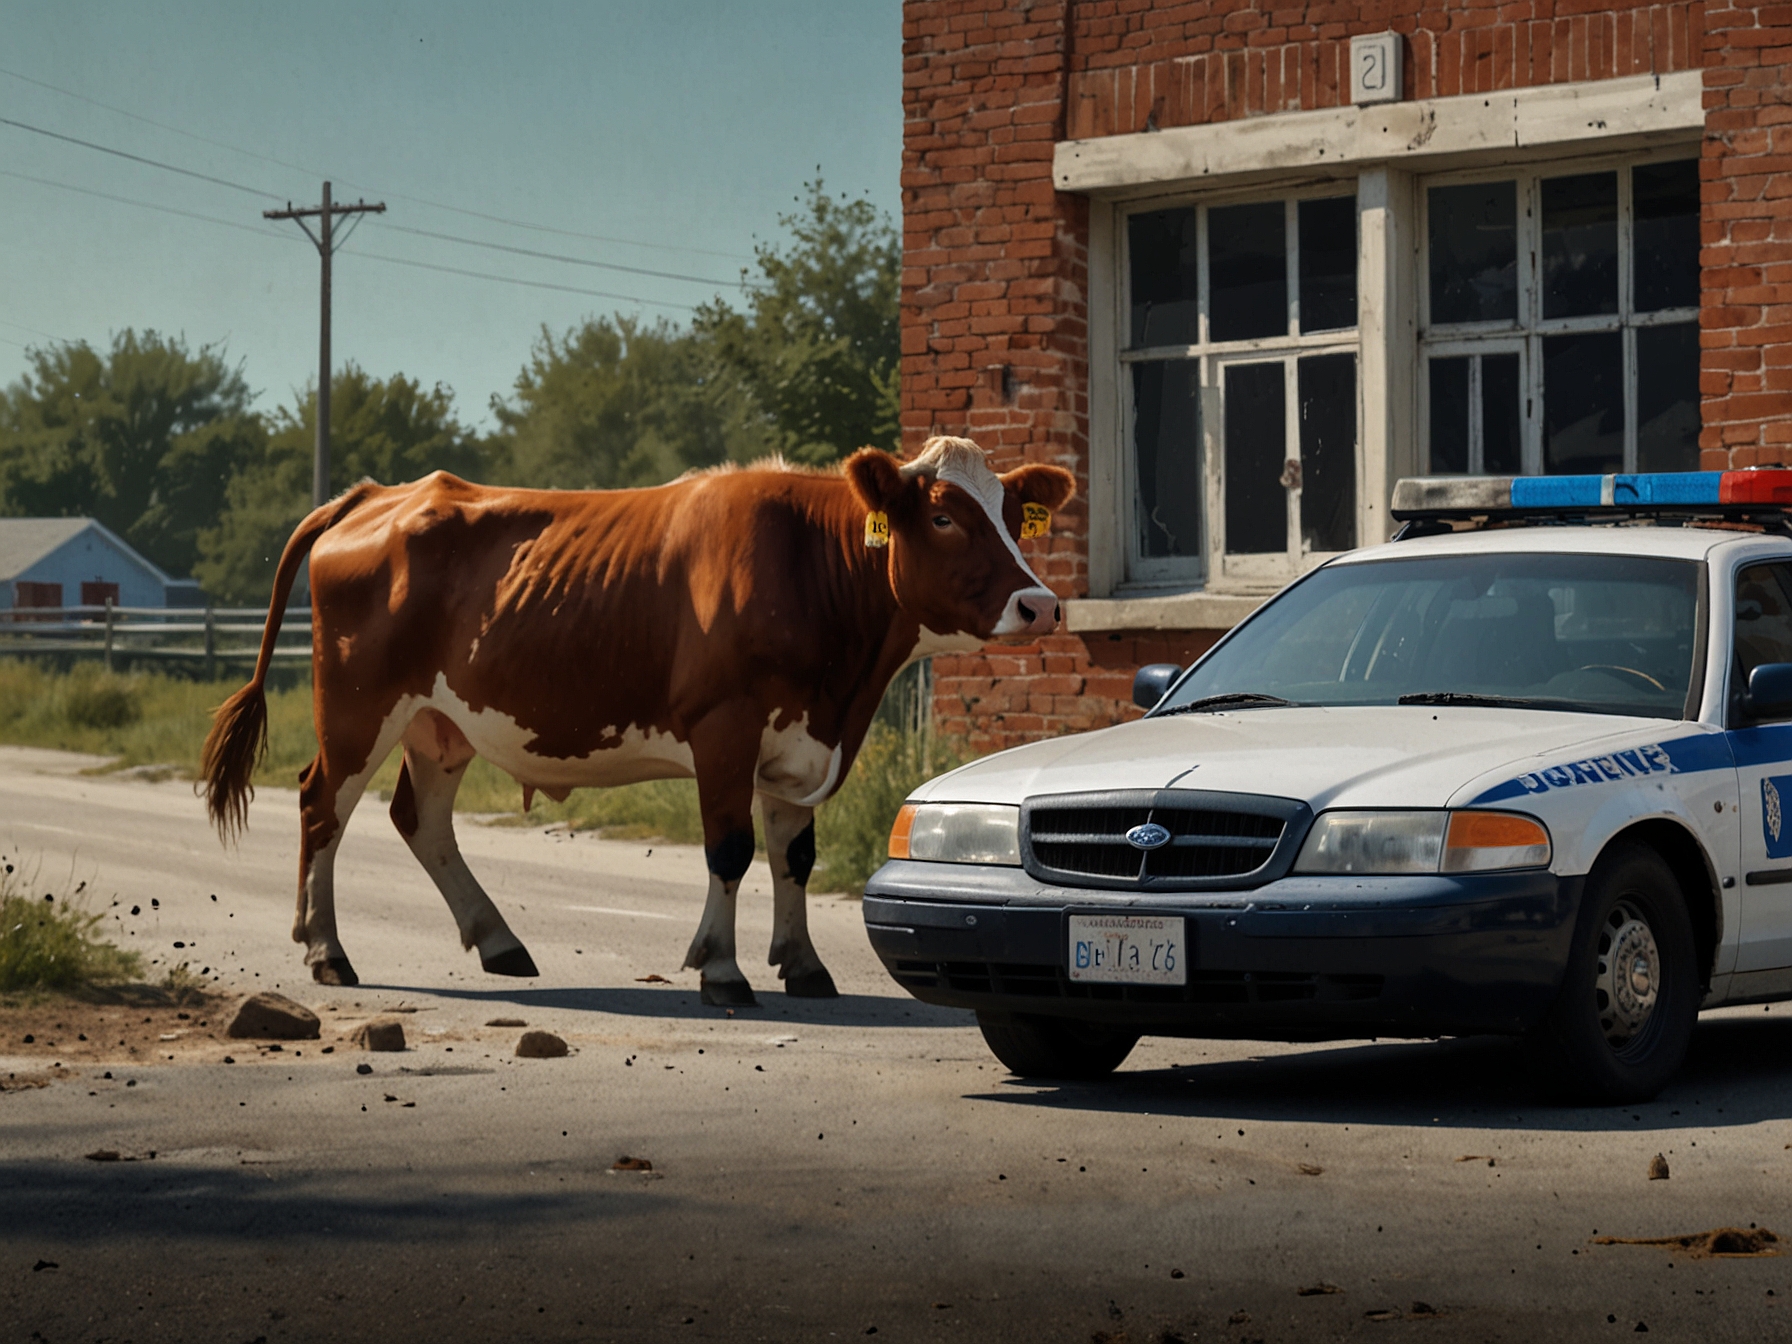 A still from the viral video showing the police car approaching the distressed cow, illustrating the controversial incident that sparked widespread condemnation and discussions on animal welfare.